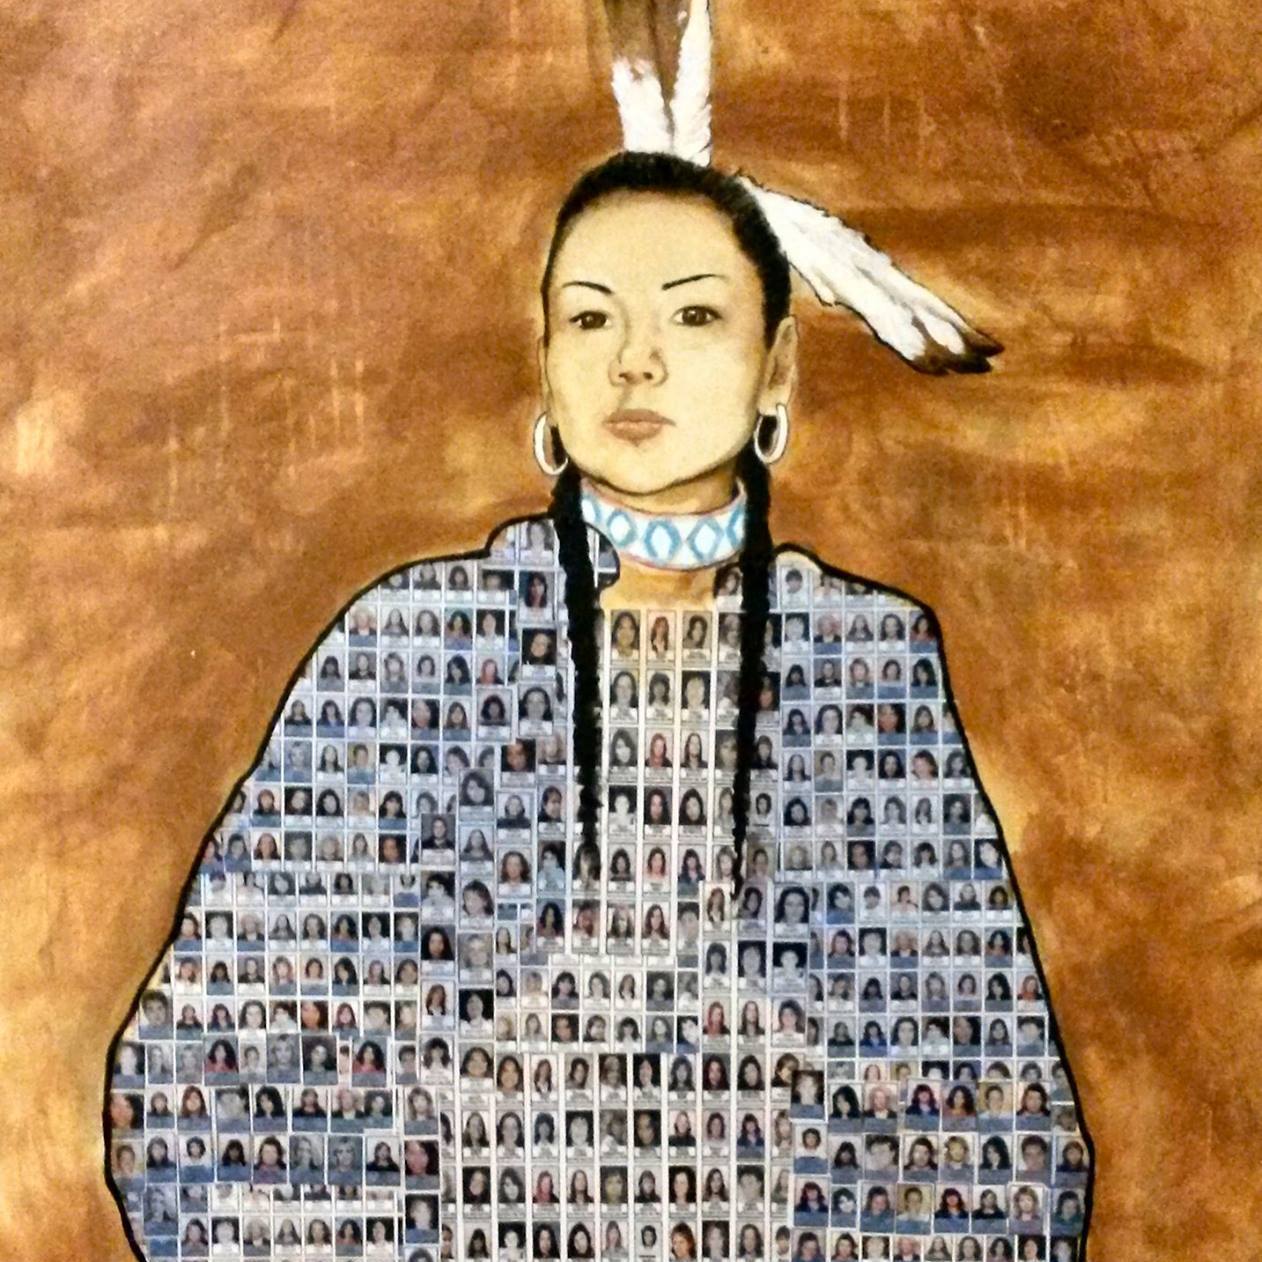 Painting of a Native American woman, made of "missing person" posters